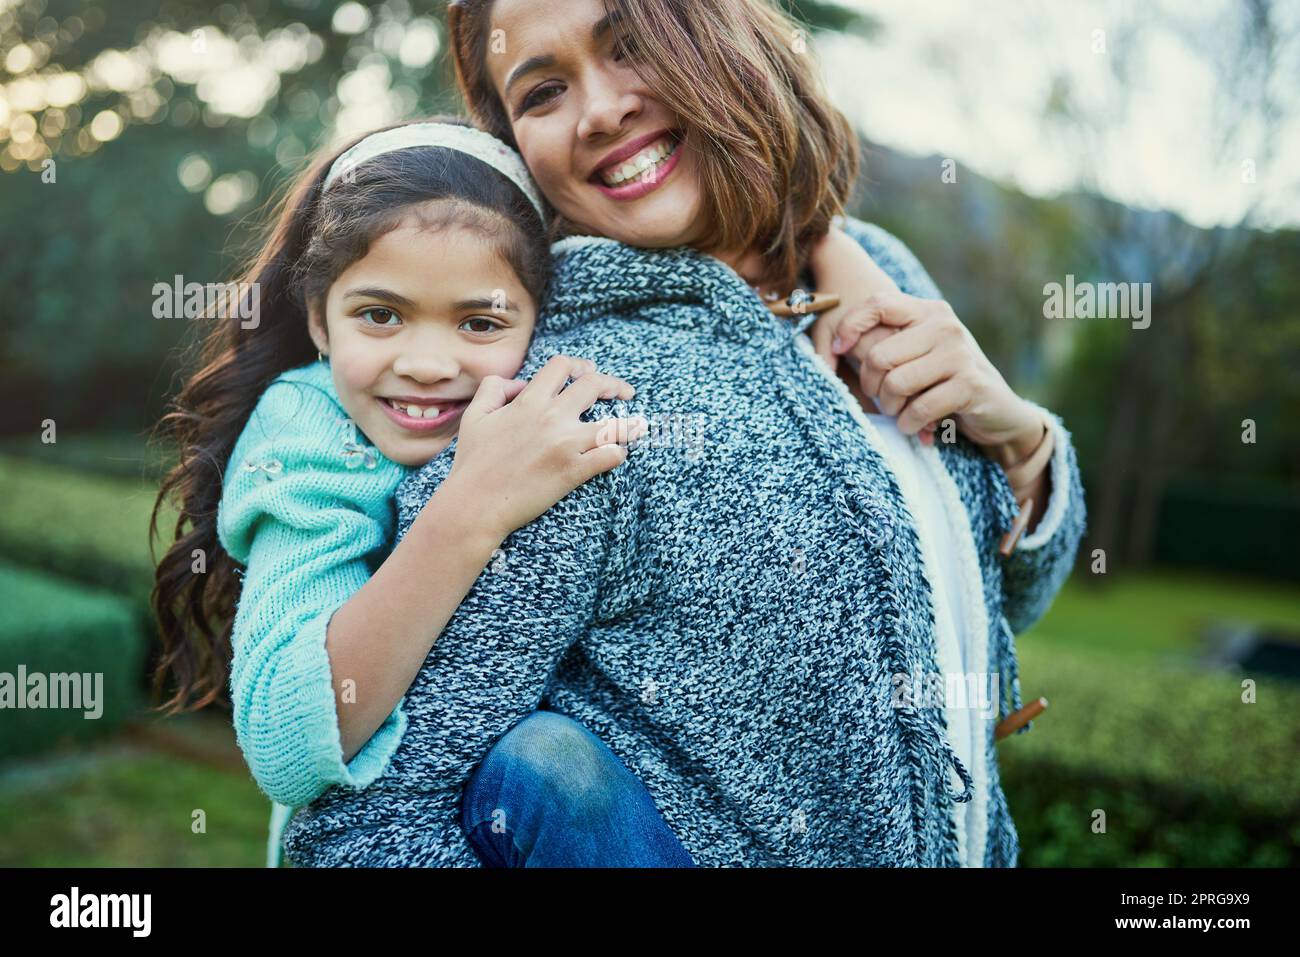 My daughter, the joy of my life. Portrait of a happy mother and daughter enjoying a piggyback ride outdoors. Stock Photo